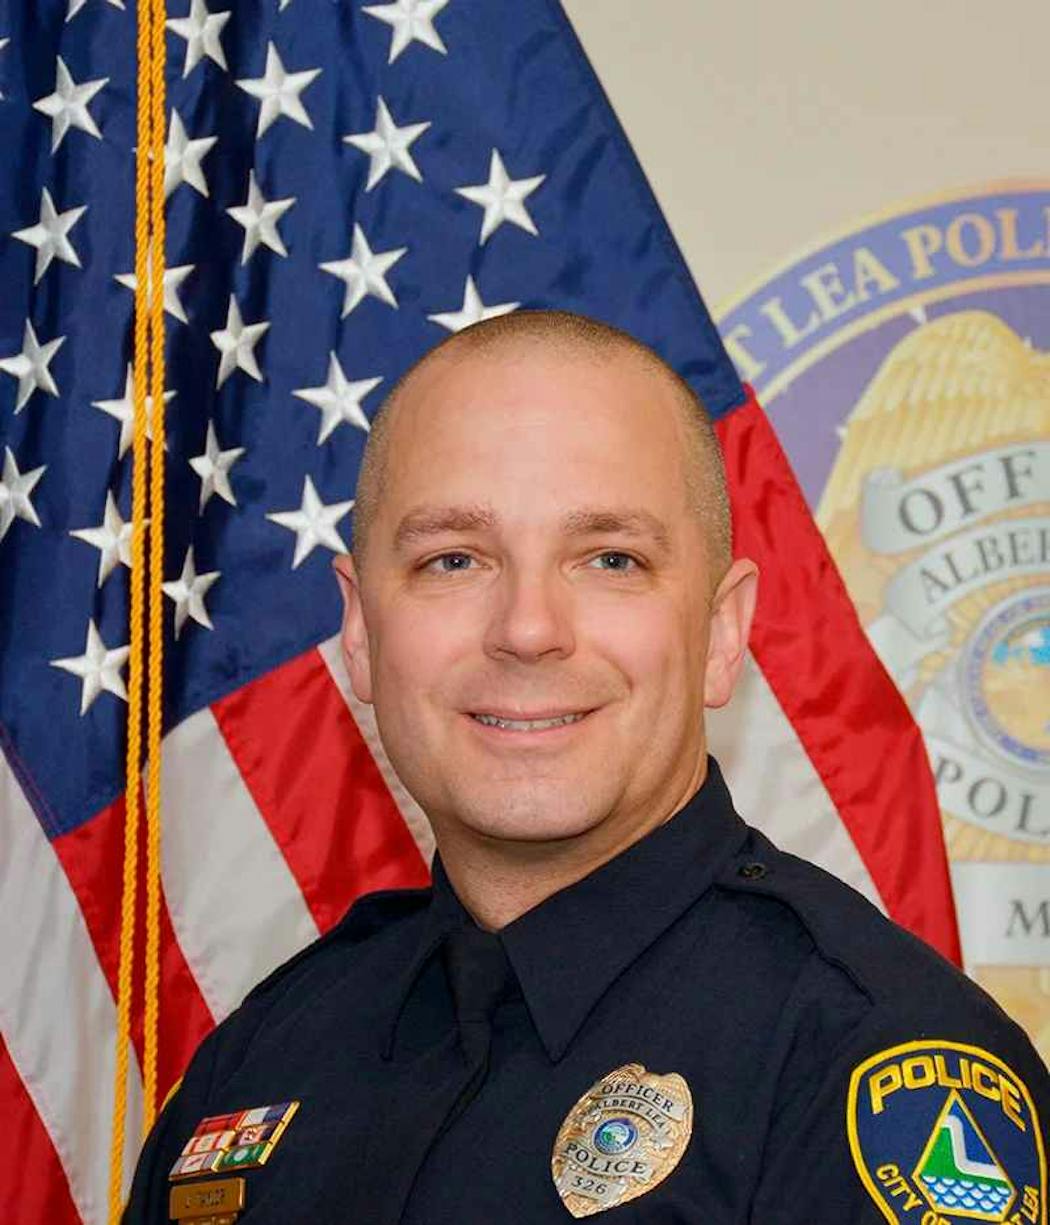 Albert Lea police Sgt. Jason Taylor, who researched the story of Judson Randall.